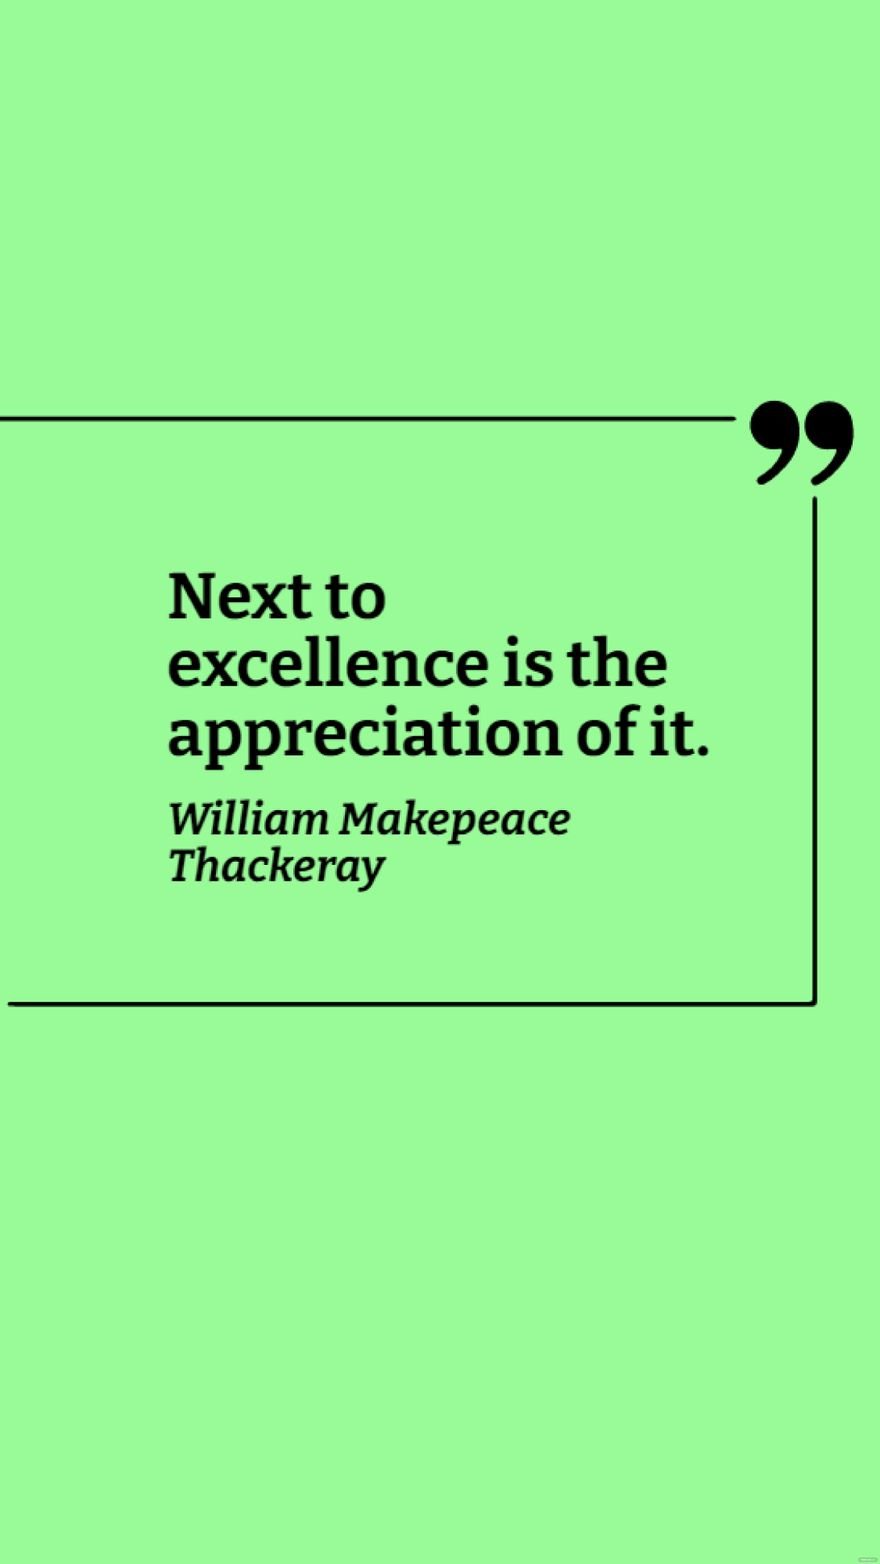 William Makepeace Thackeray - Next to excellence is the appreciation of it.